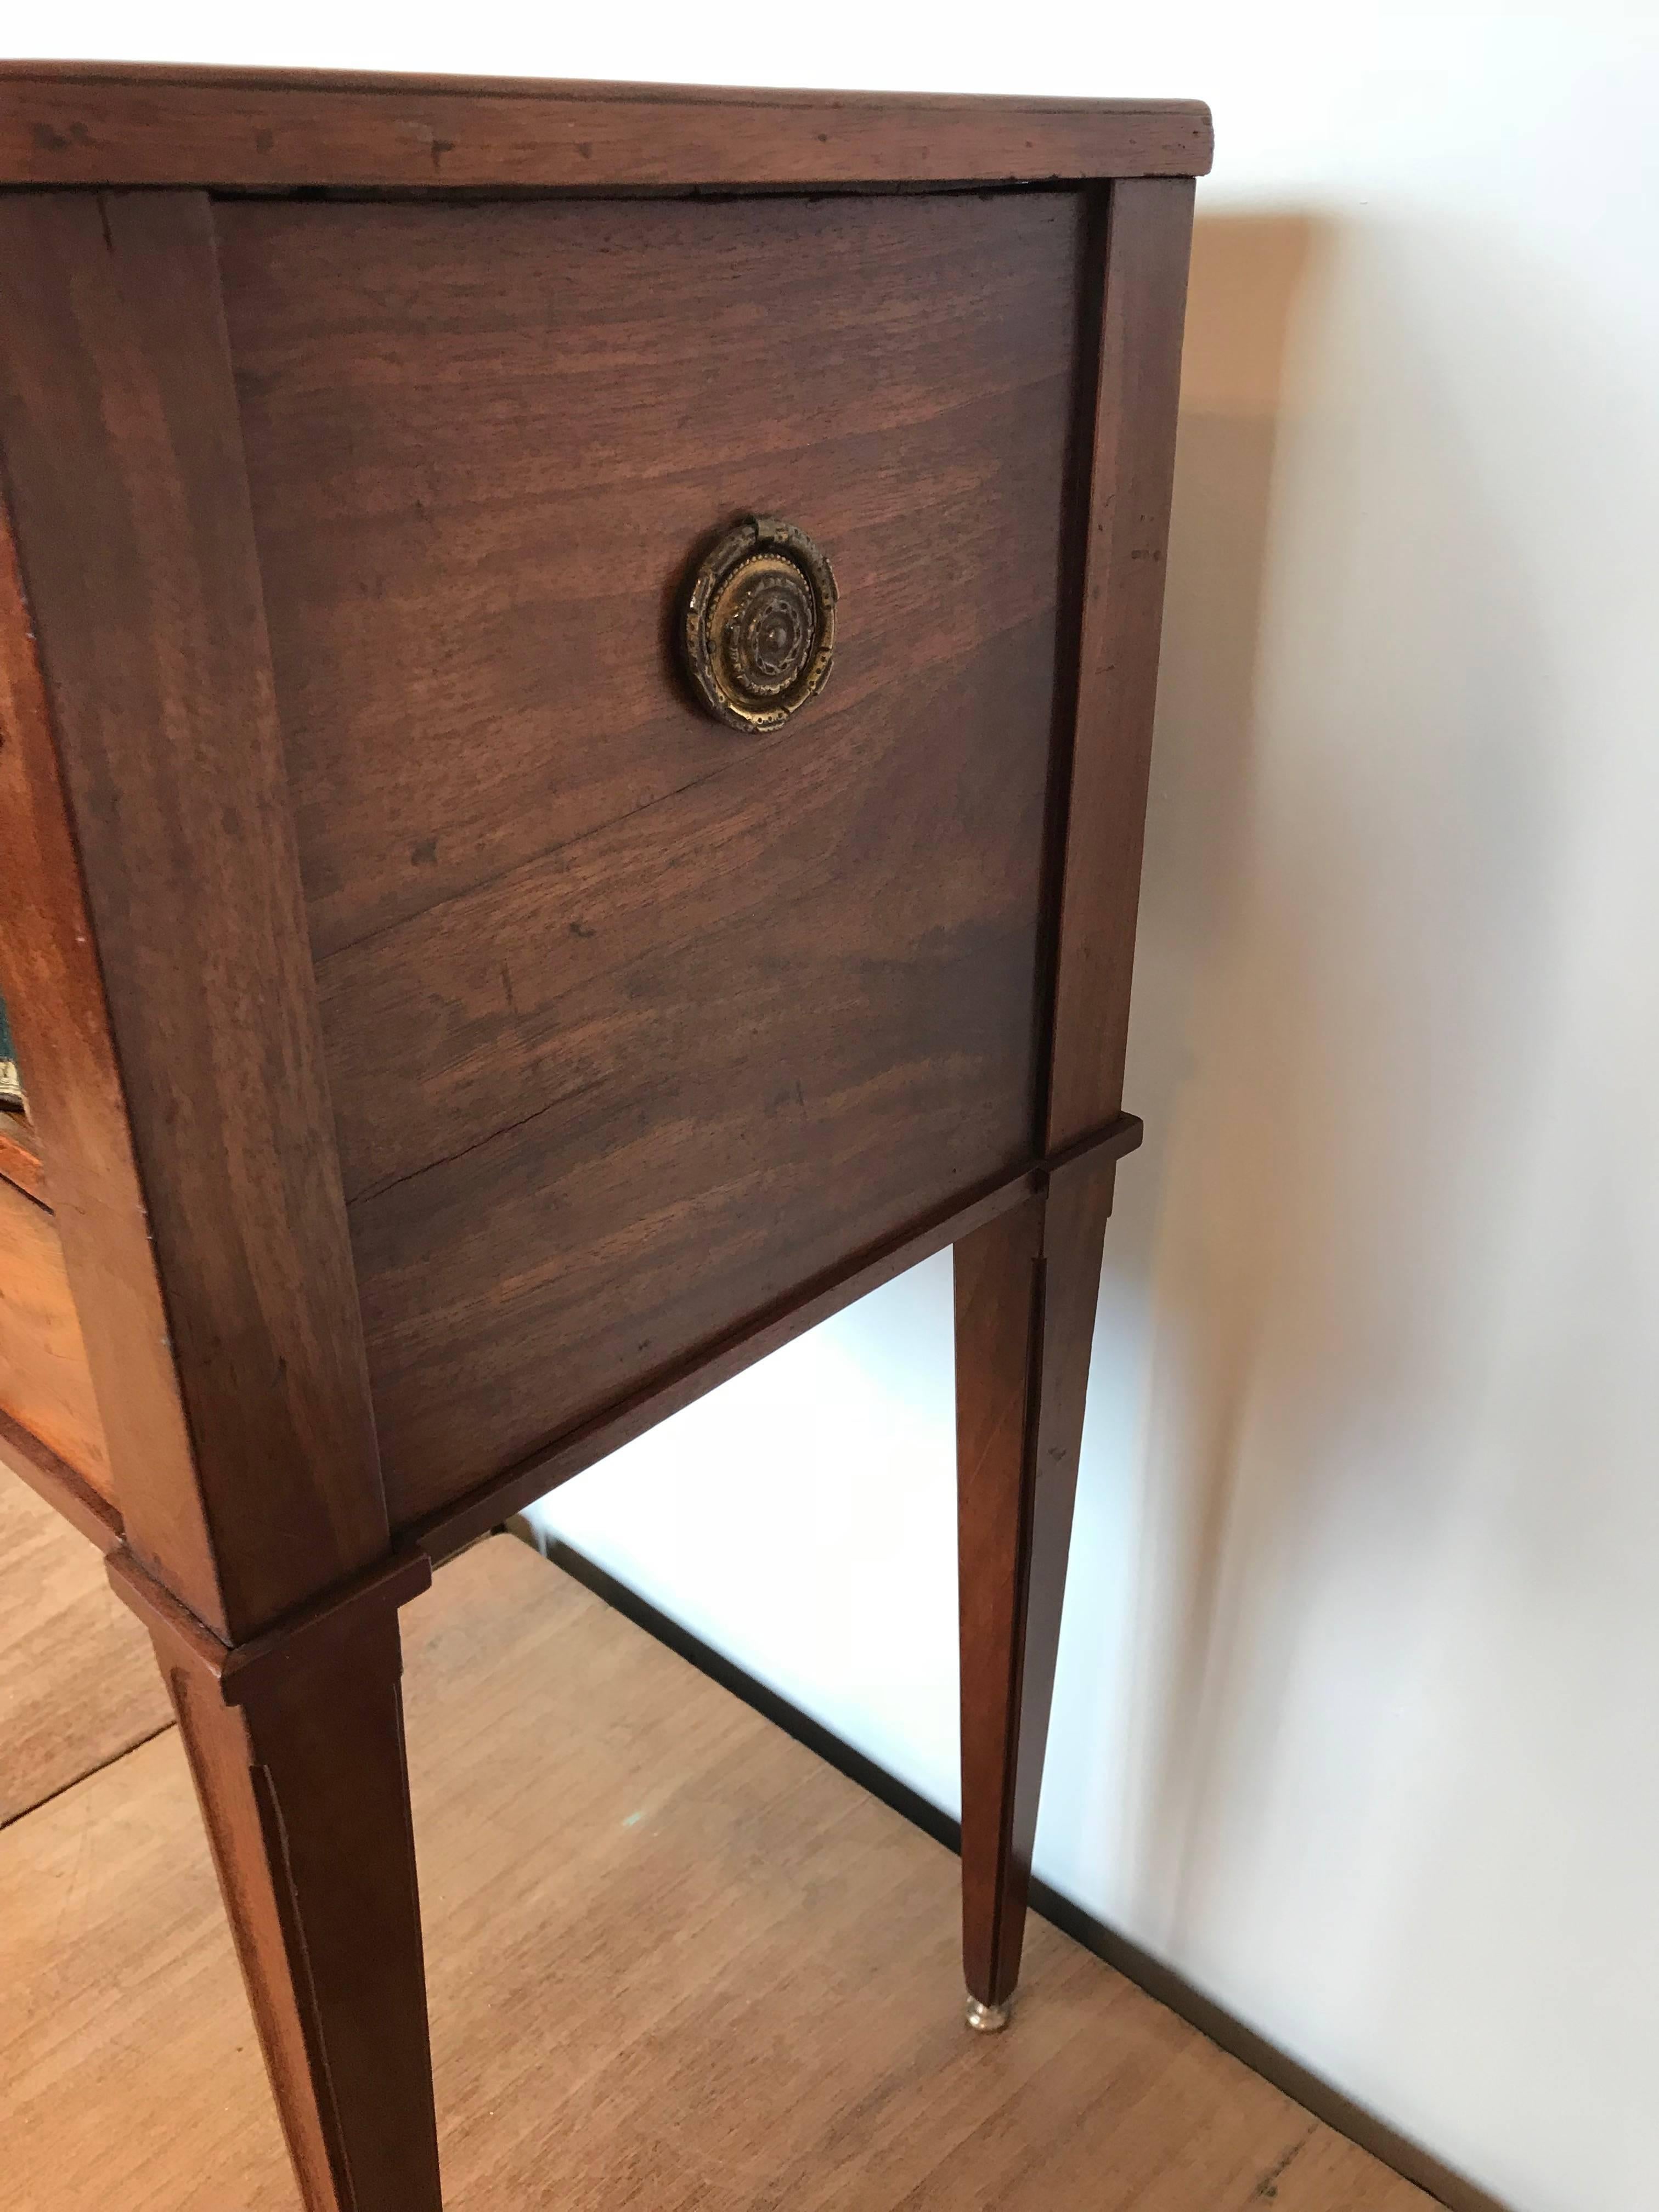 20th Century Empire Style Mahogany End Table with Faux Books Rolling Shutter Door and Drawer